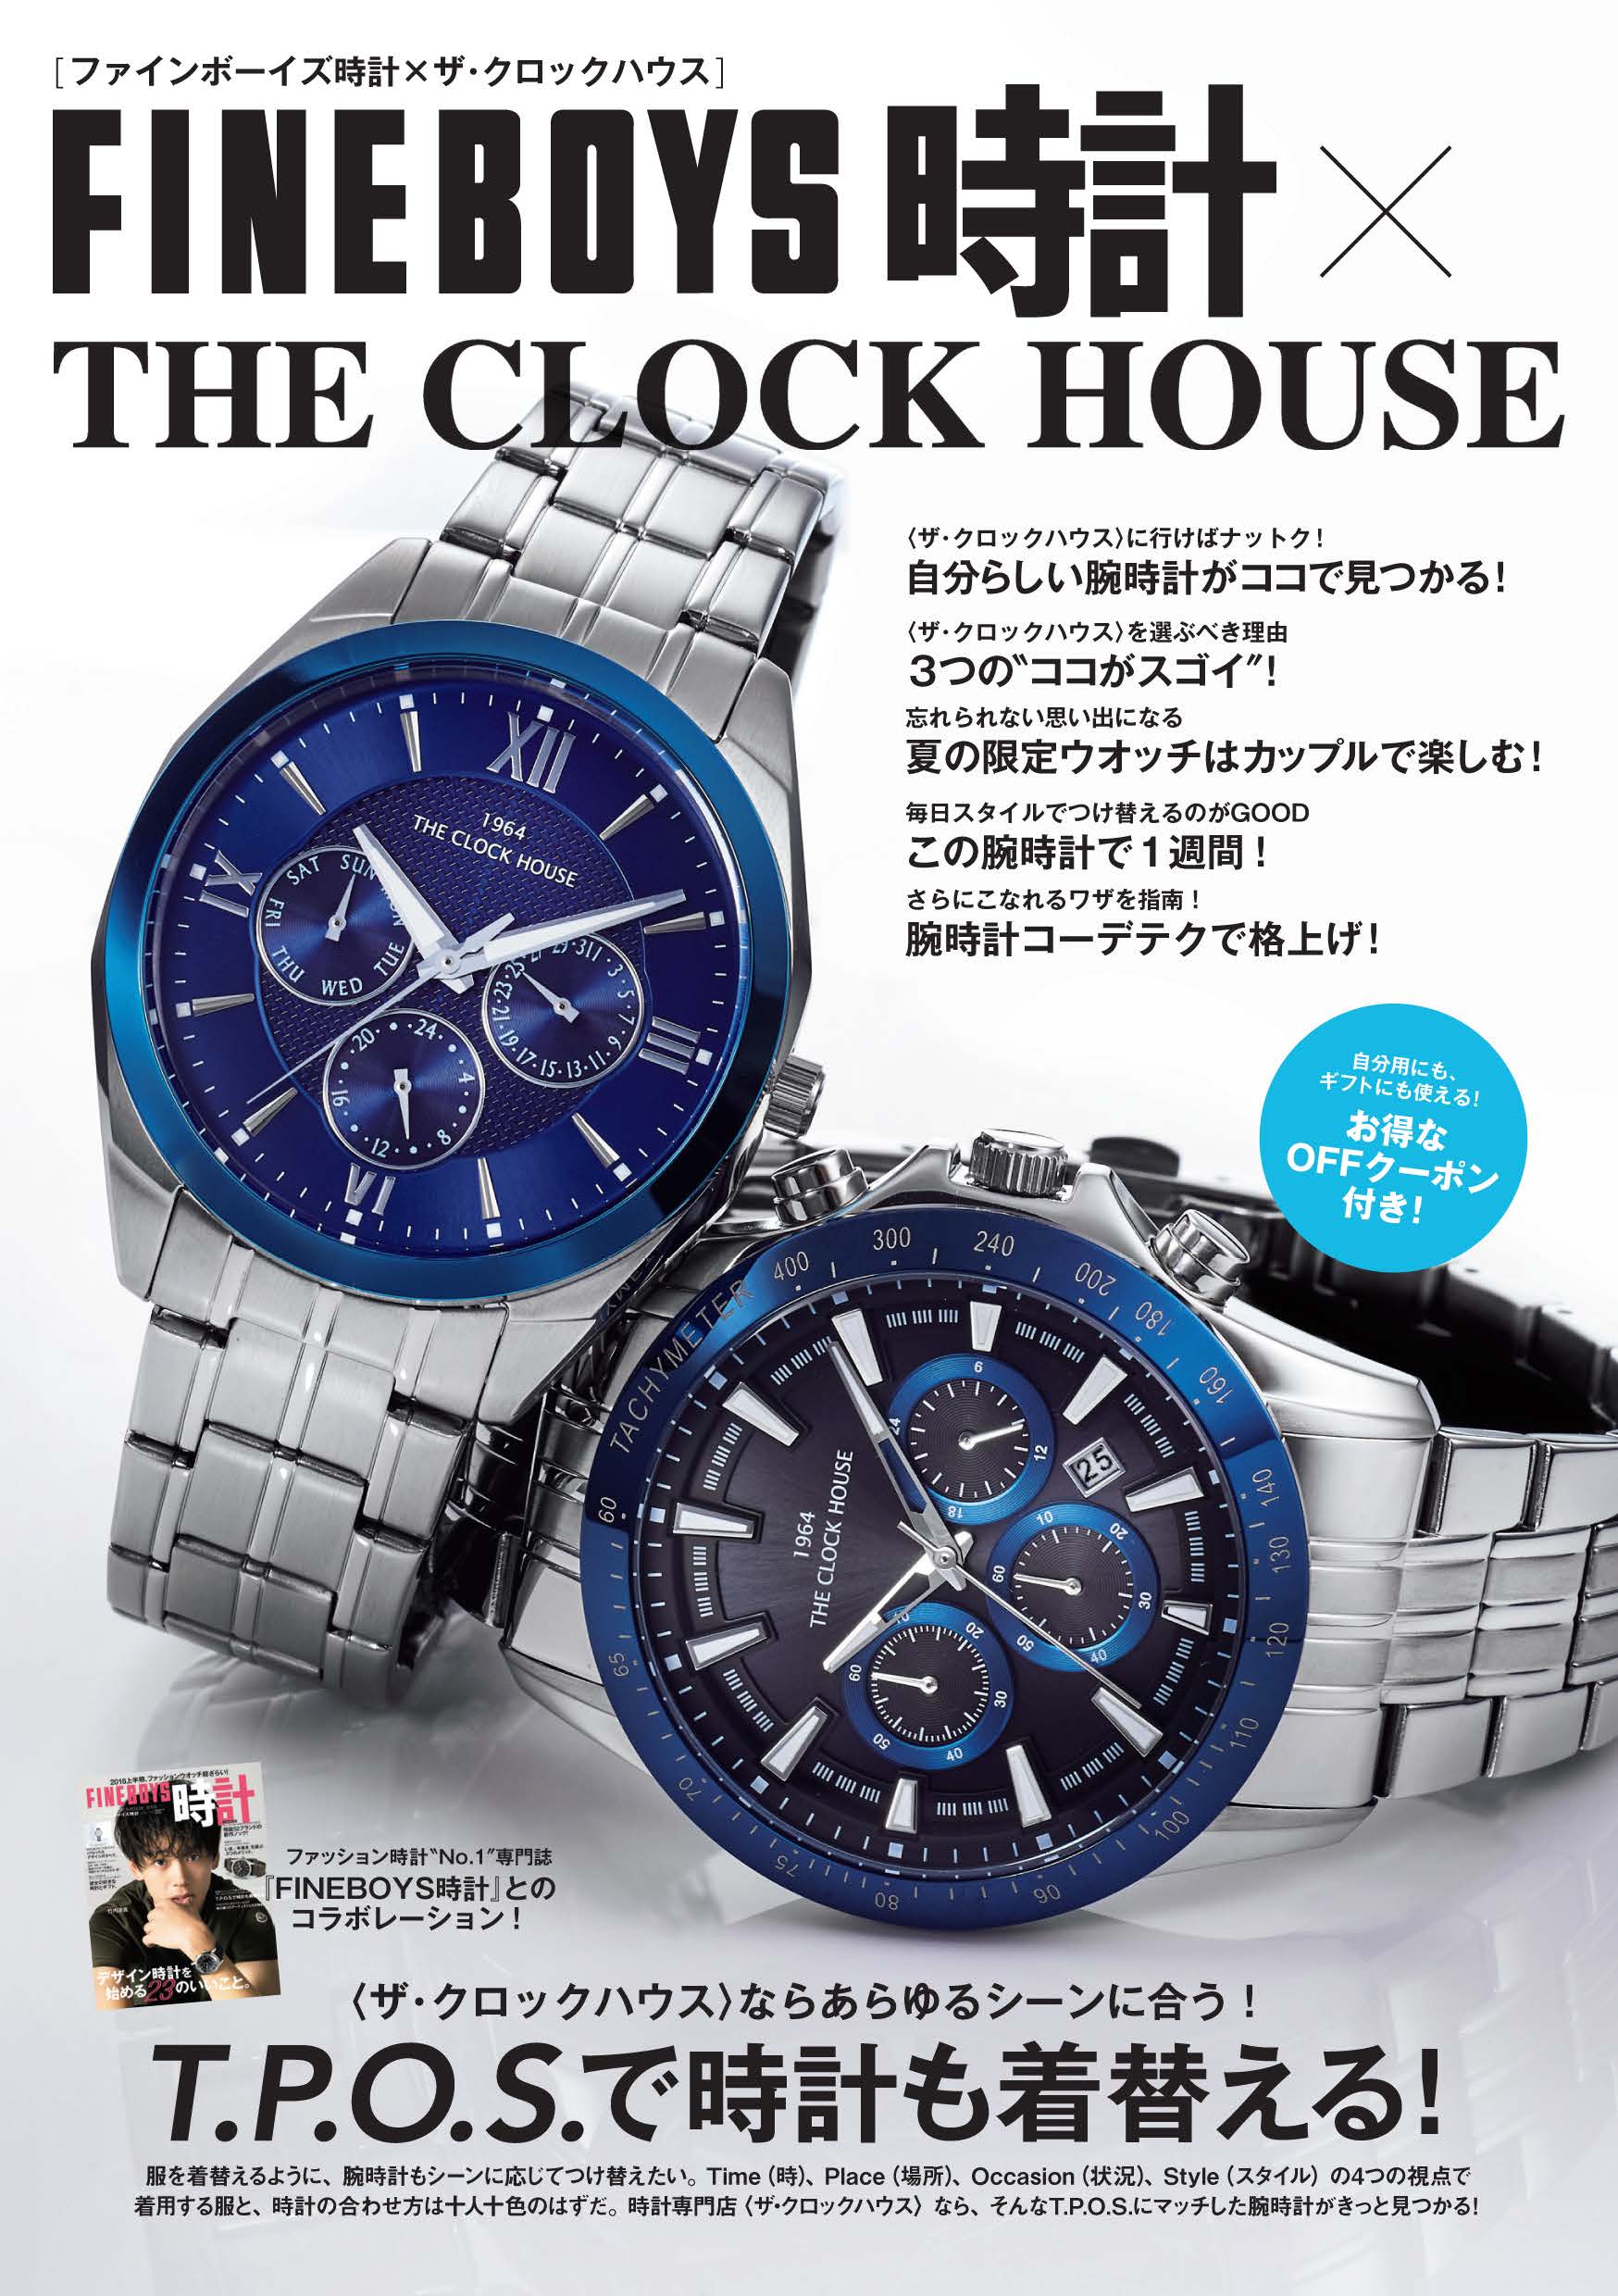 THE CLOCK HOUSE Limited Edition 腕時計 メンズ